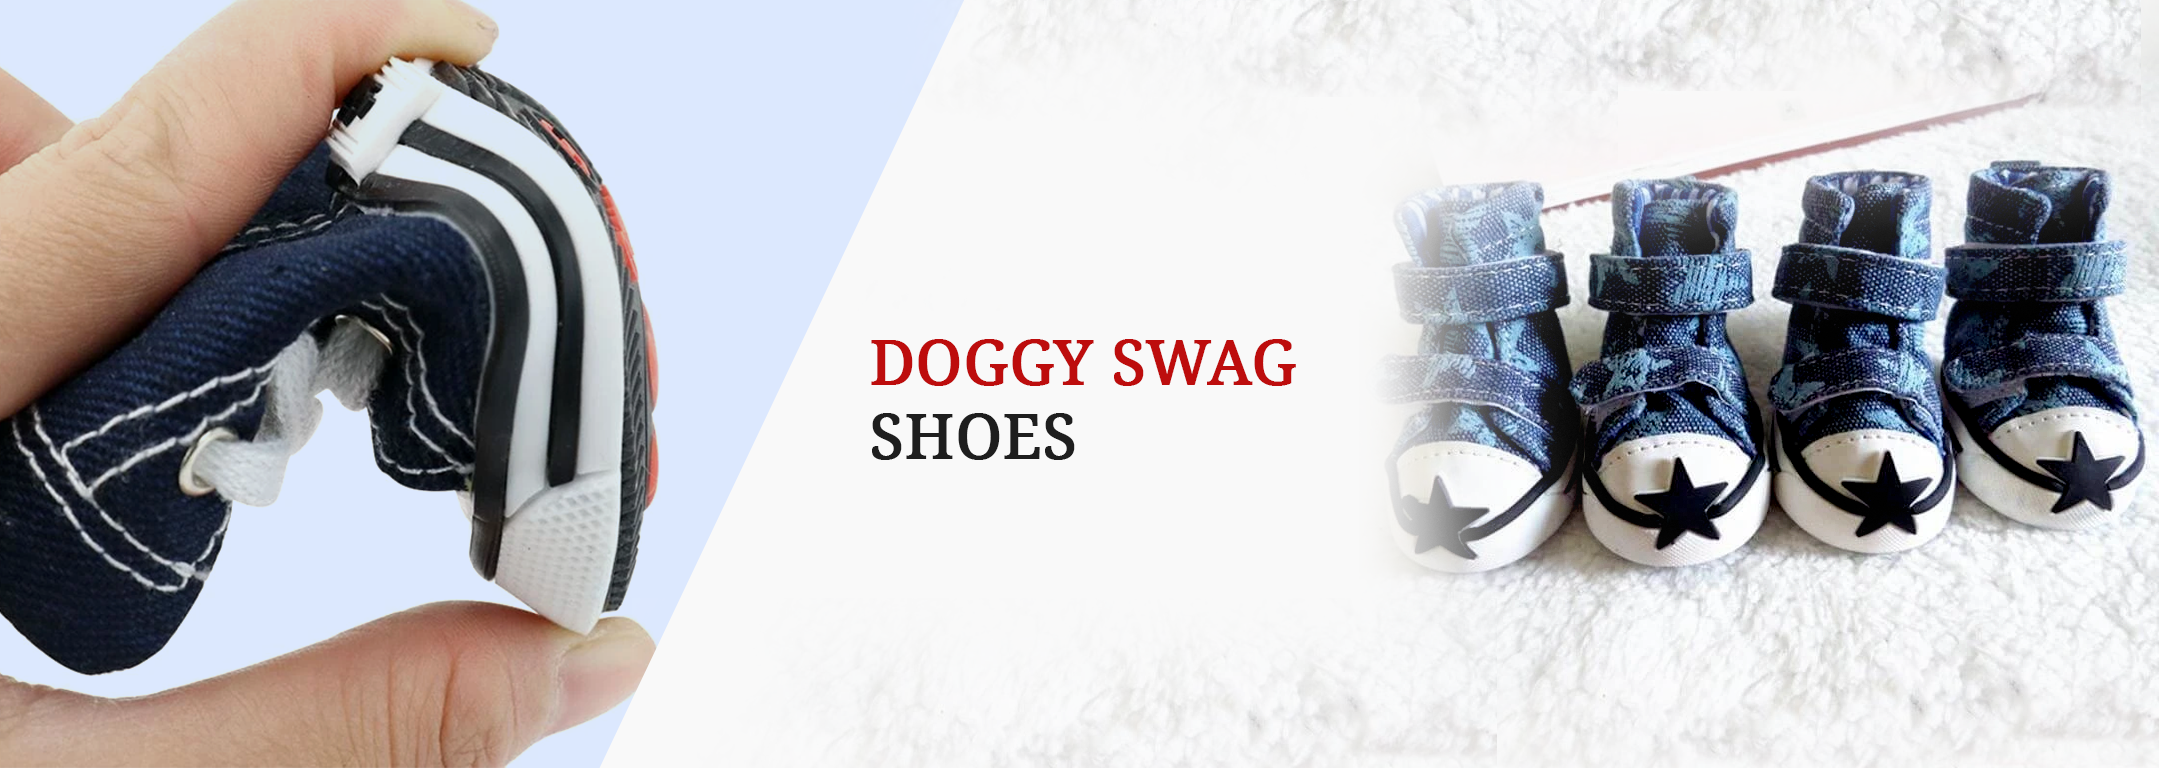 swag shoes online